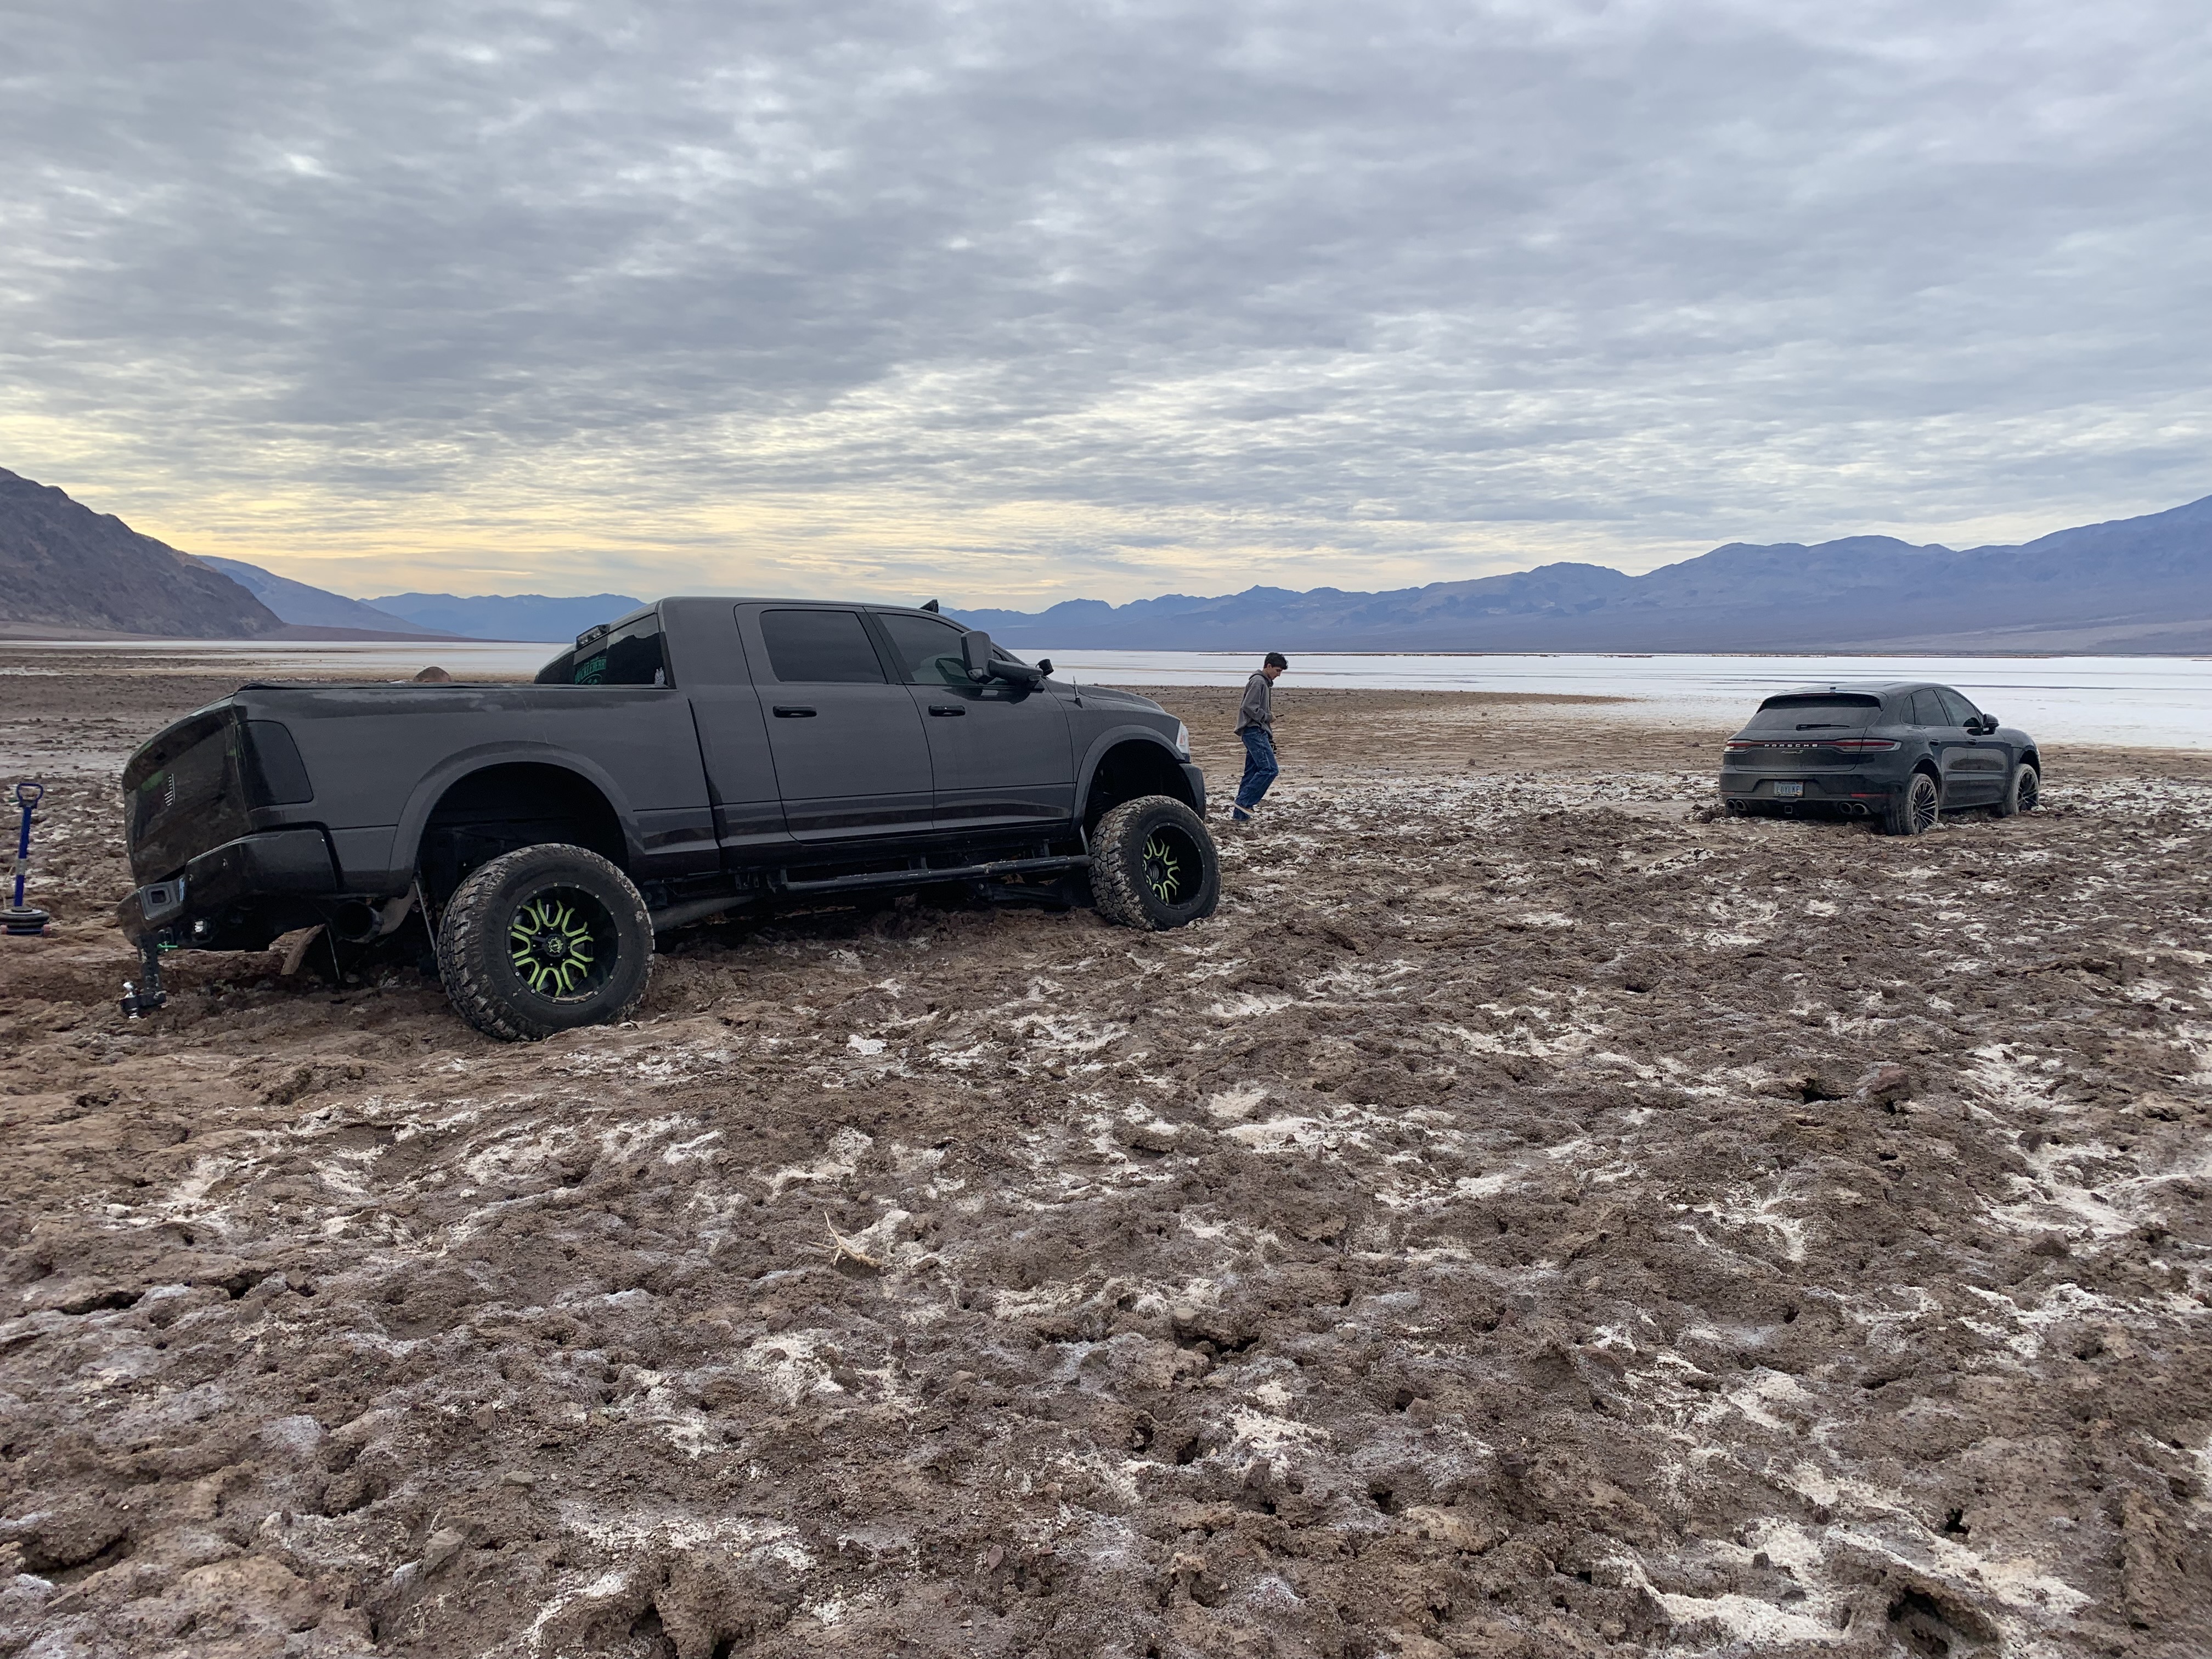 A person walks between a dark gray pickup truck and a black car in an open flat bare landscape